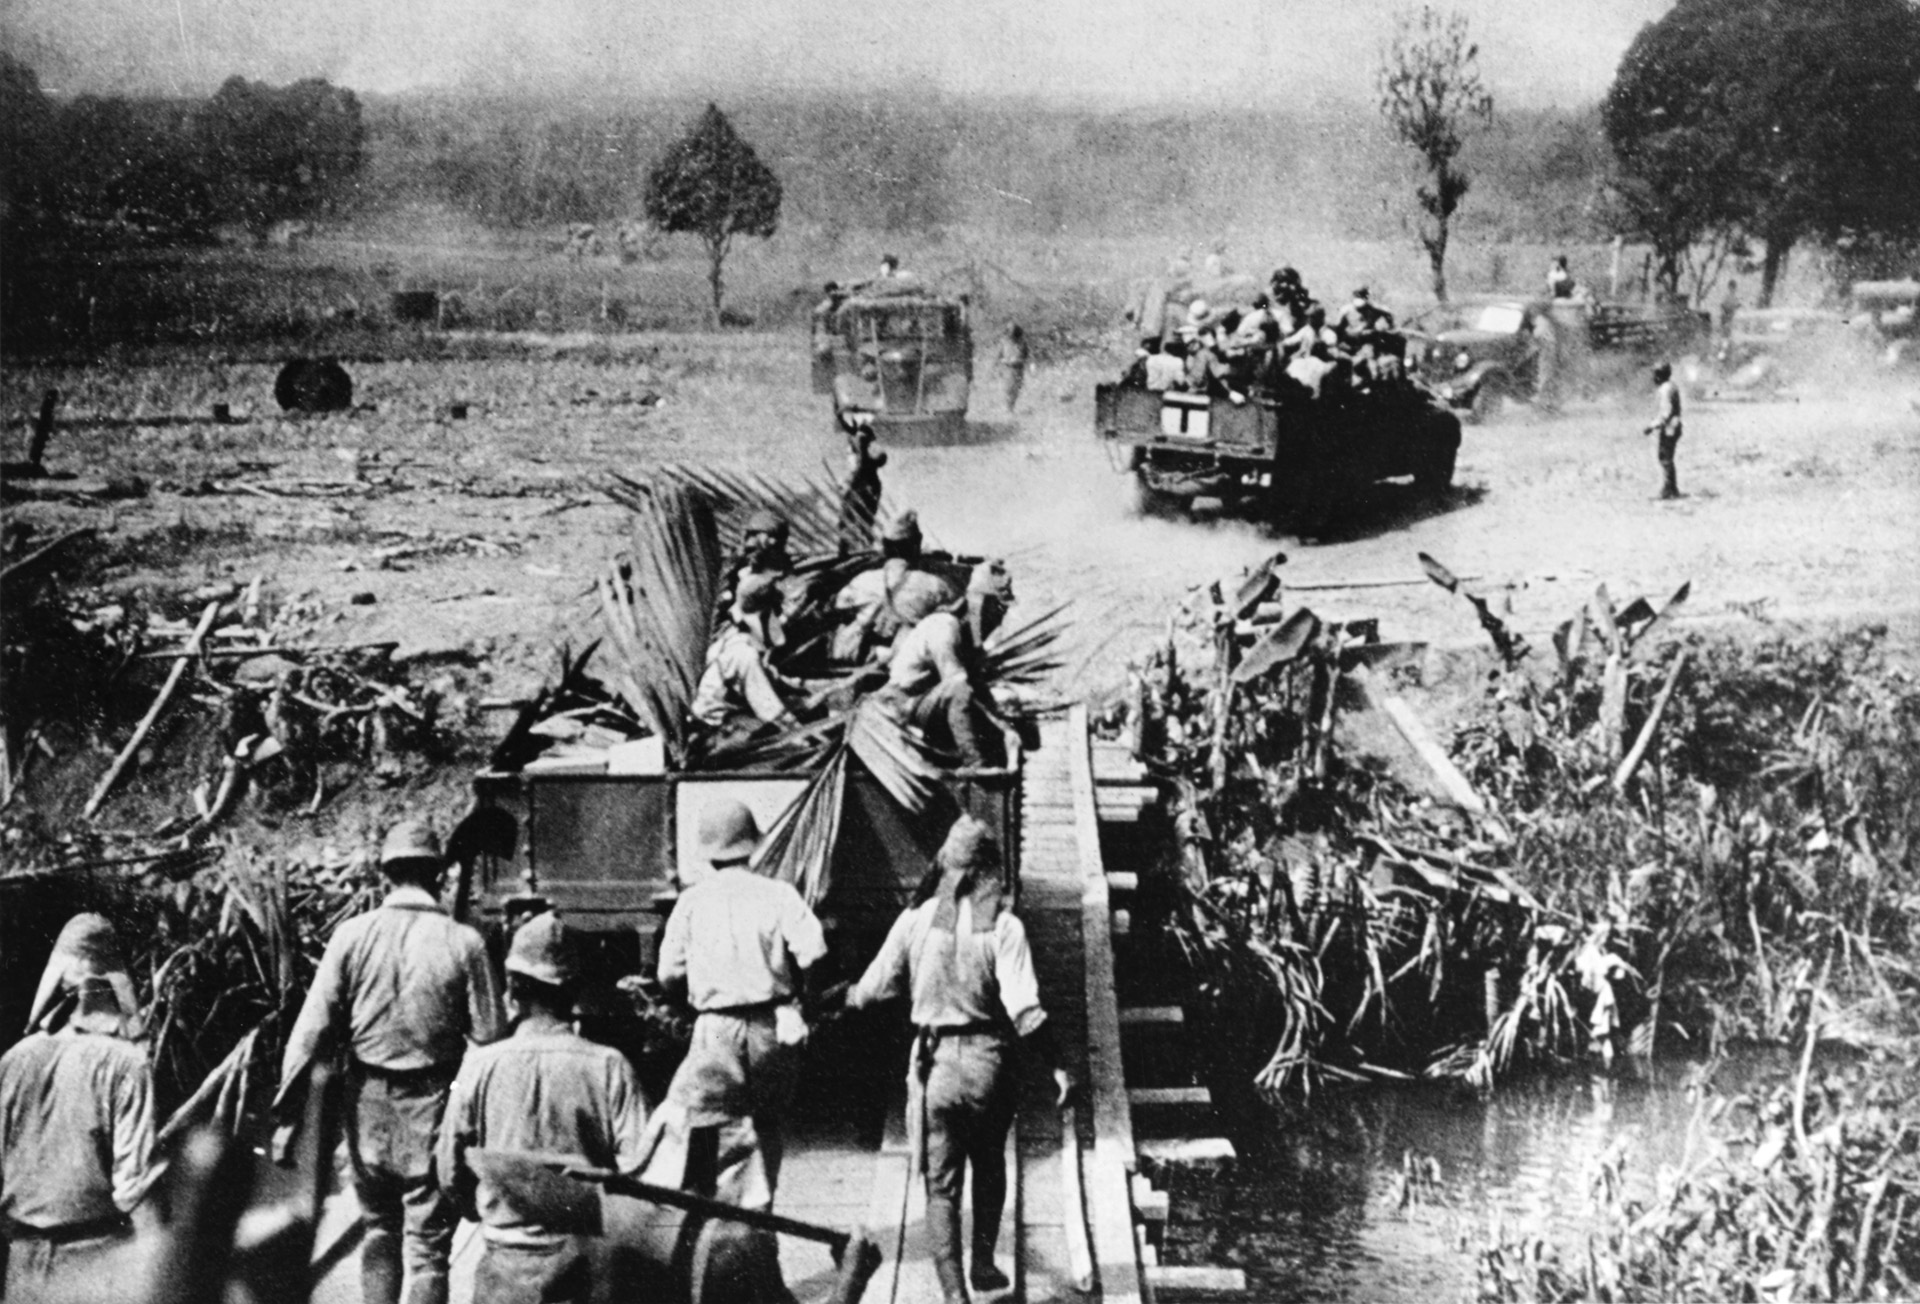 In this April 3, 1942, photo, Japanese soldiers move forward on foot and aboard vehicles during their victorious onslaught in the Philippines. The Japanese occupation of the Philippines was completed with the surrender of American and Filipino troops on the Bataan Peninsula and the island of Corregidor.